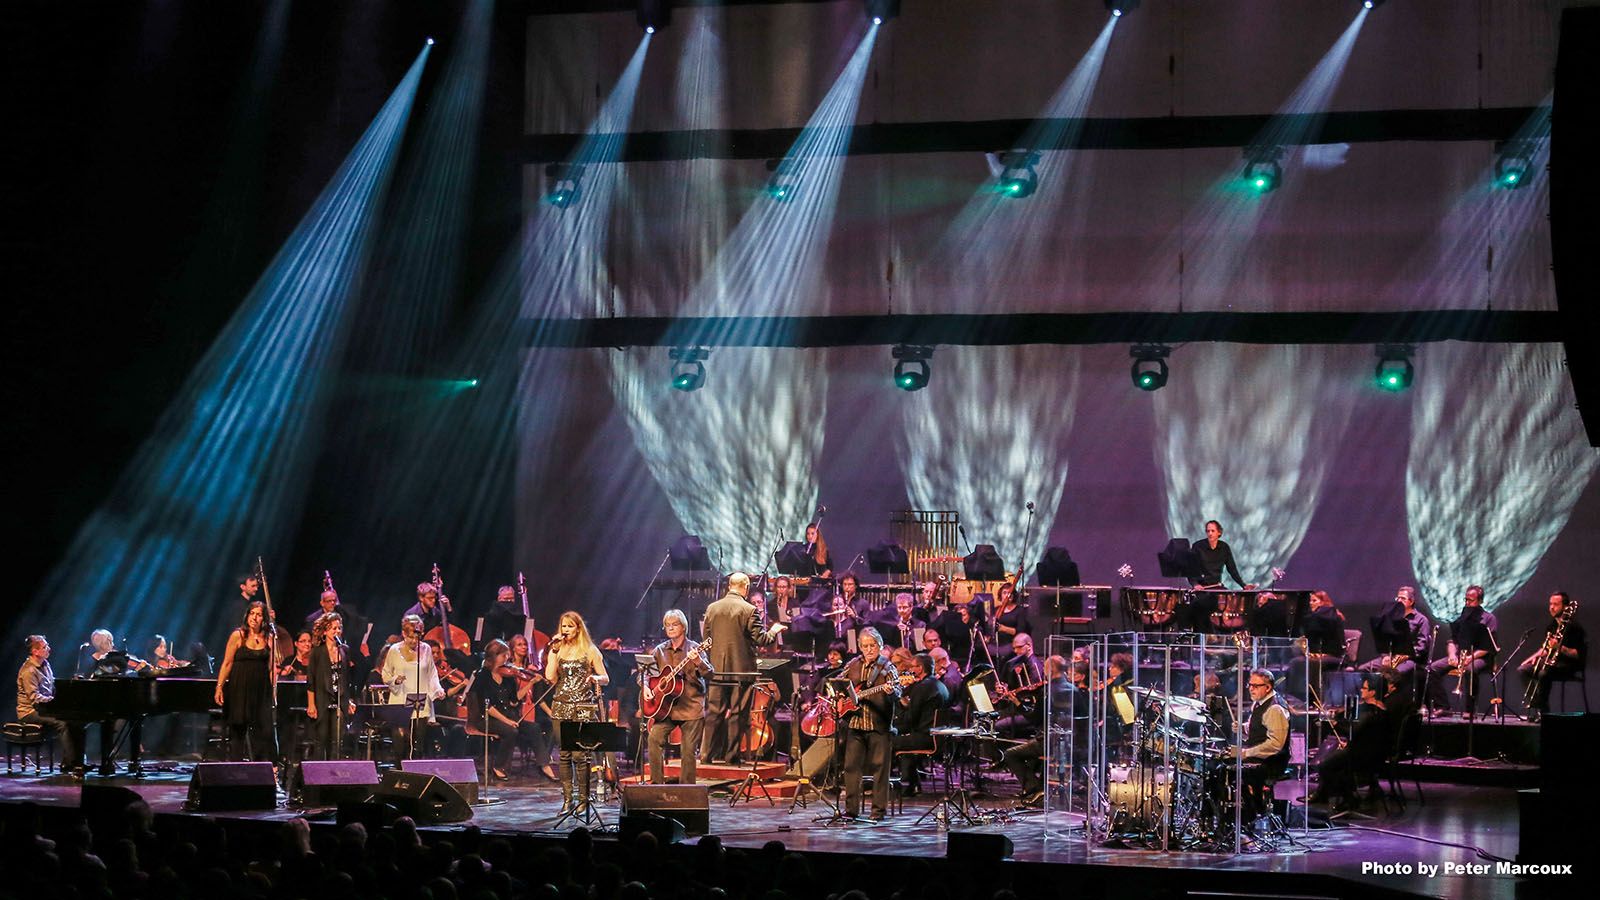 The Fort Wayne Philharmonic will play the music of Fleetwood Mac with the band Jean ’n Classics on Sept. 23 at Sweetwater Performance Pavilion.